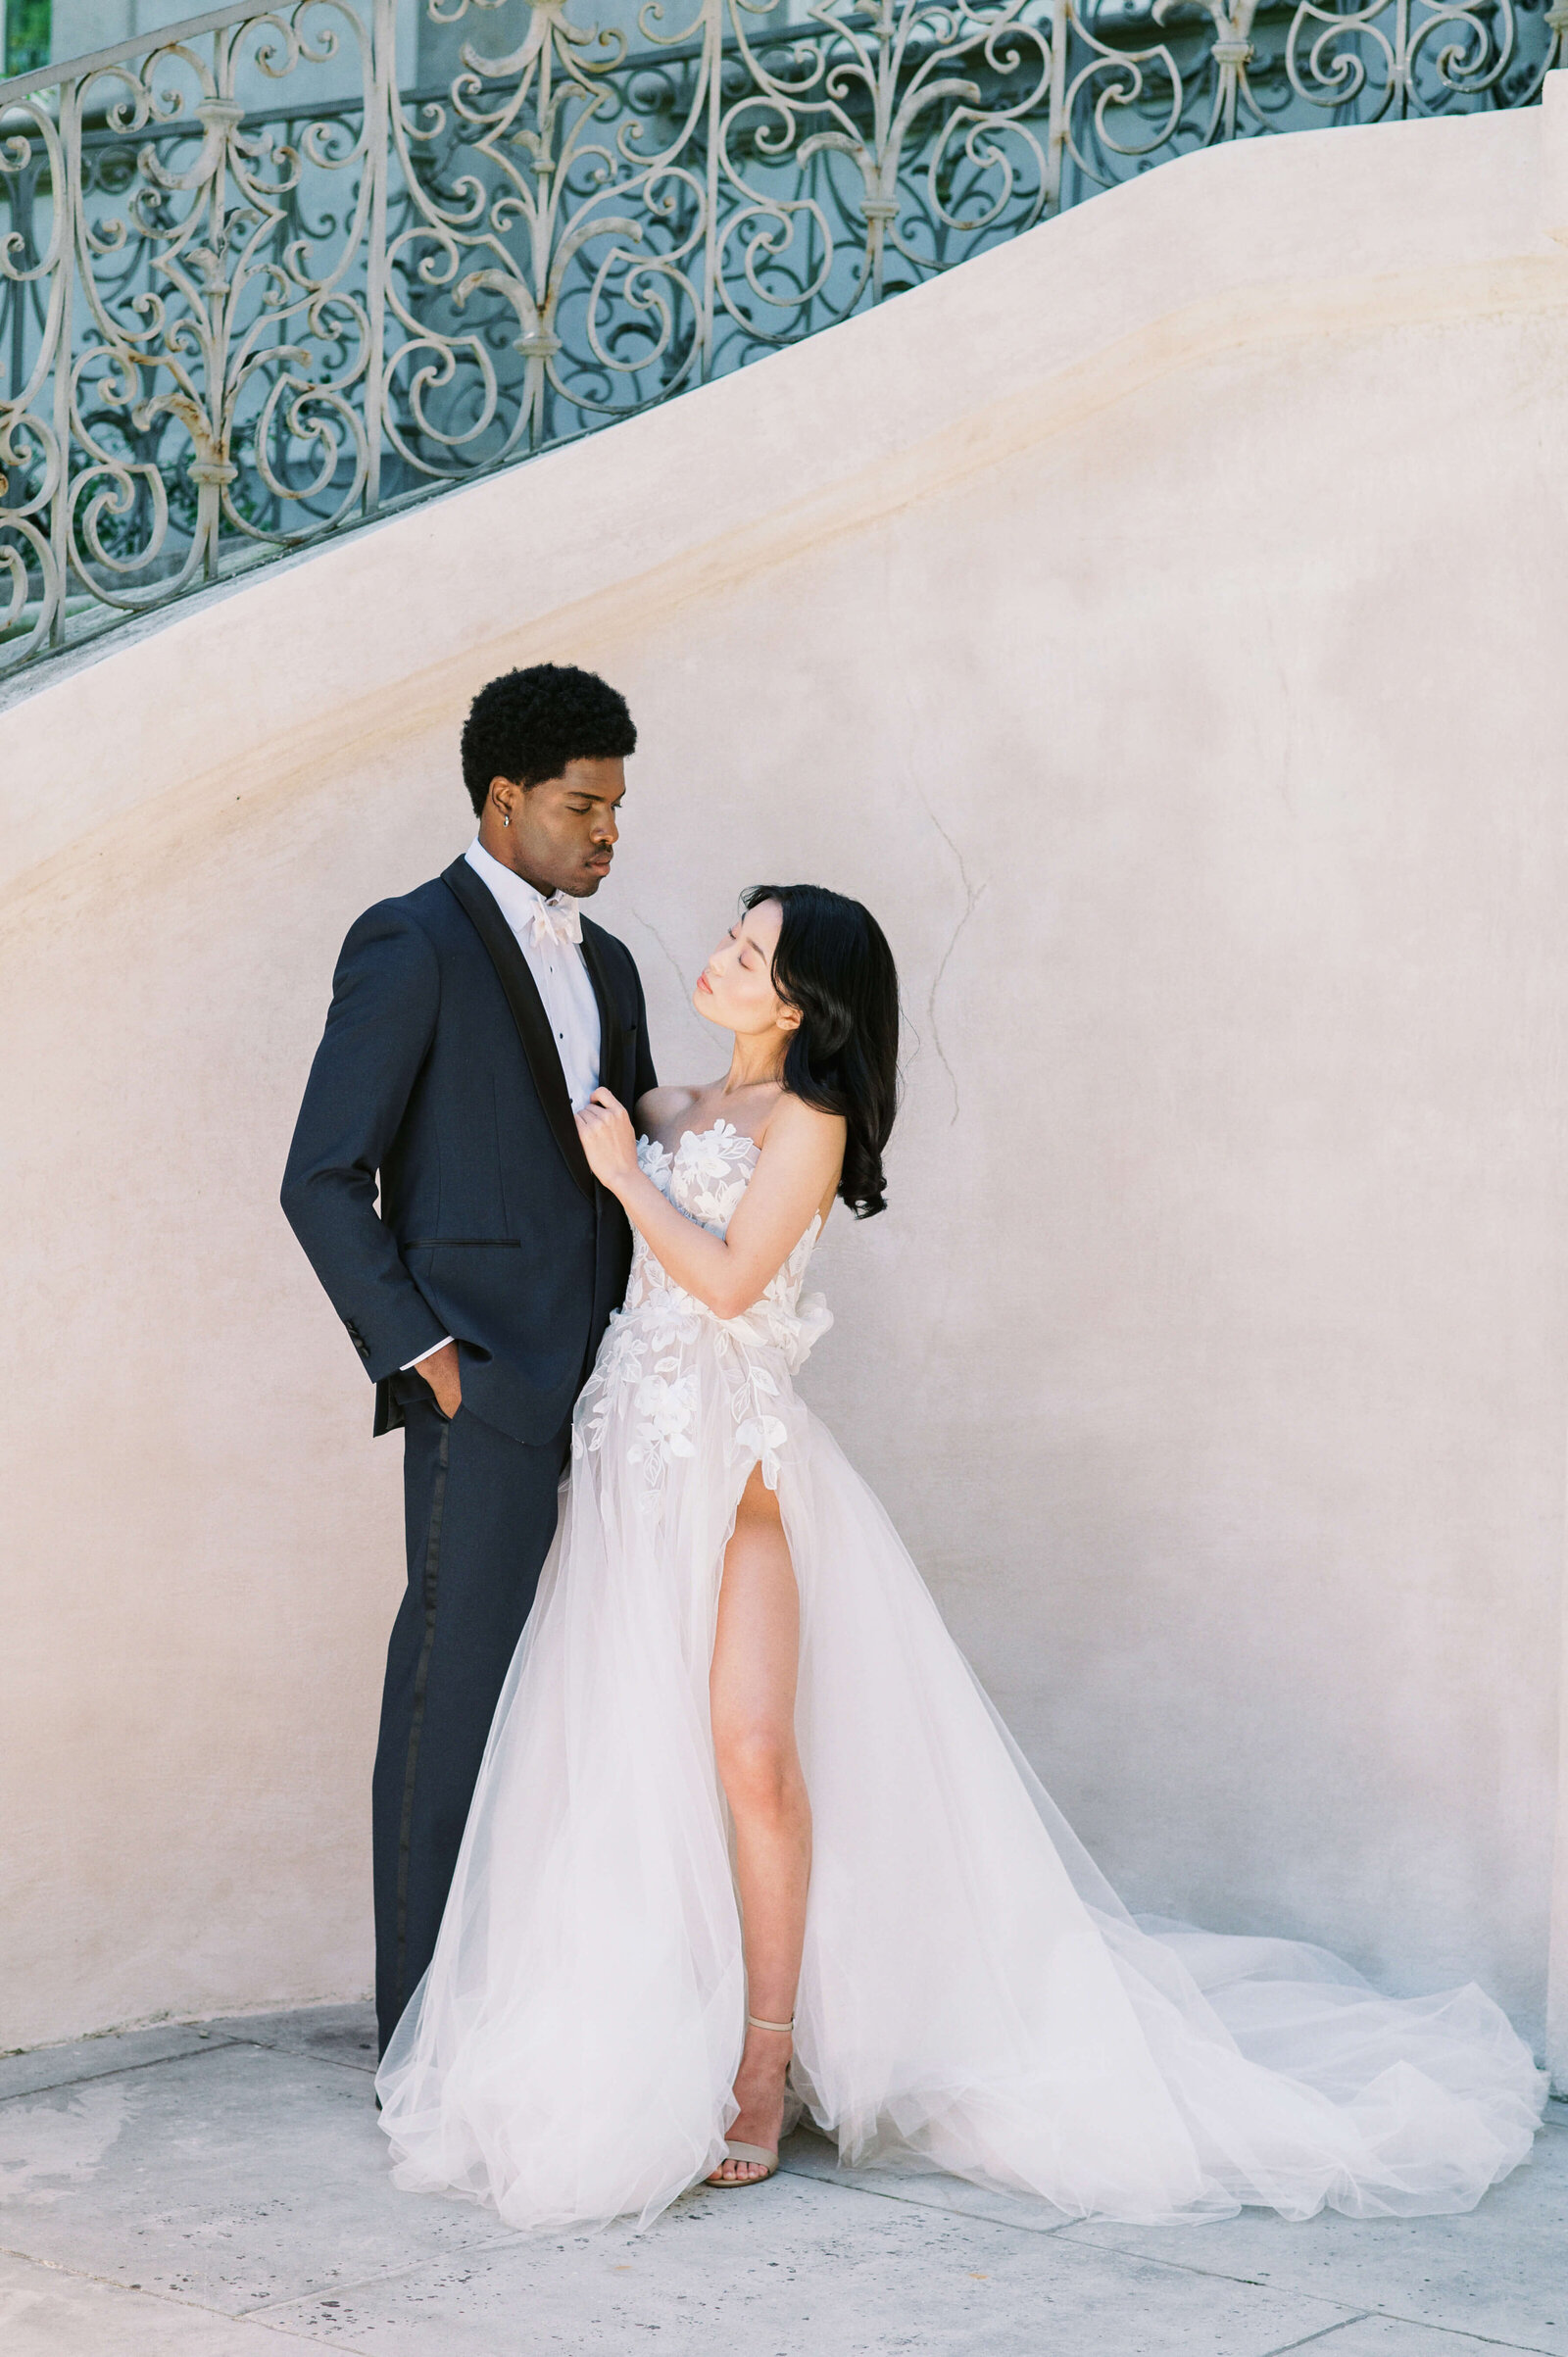 A mixed race couple pose together during their couple's portraits at their wedding